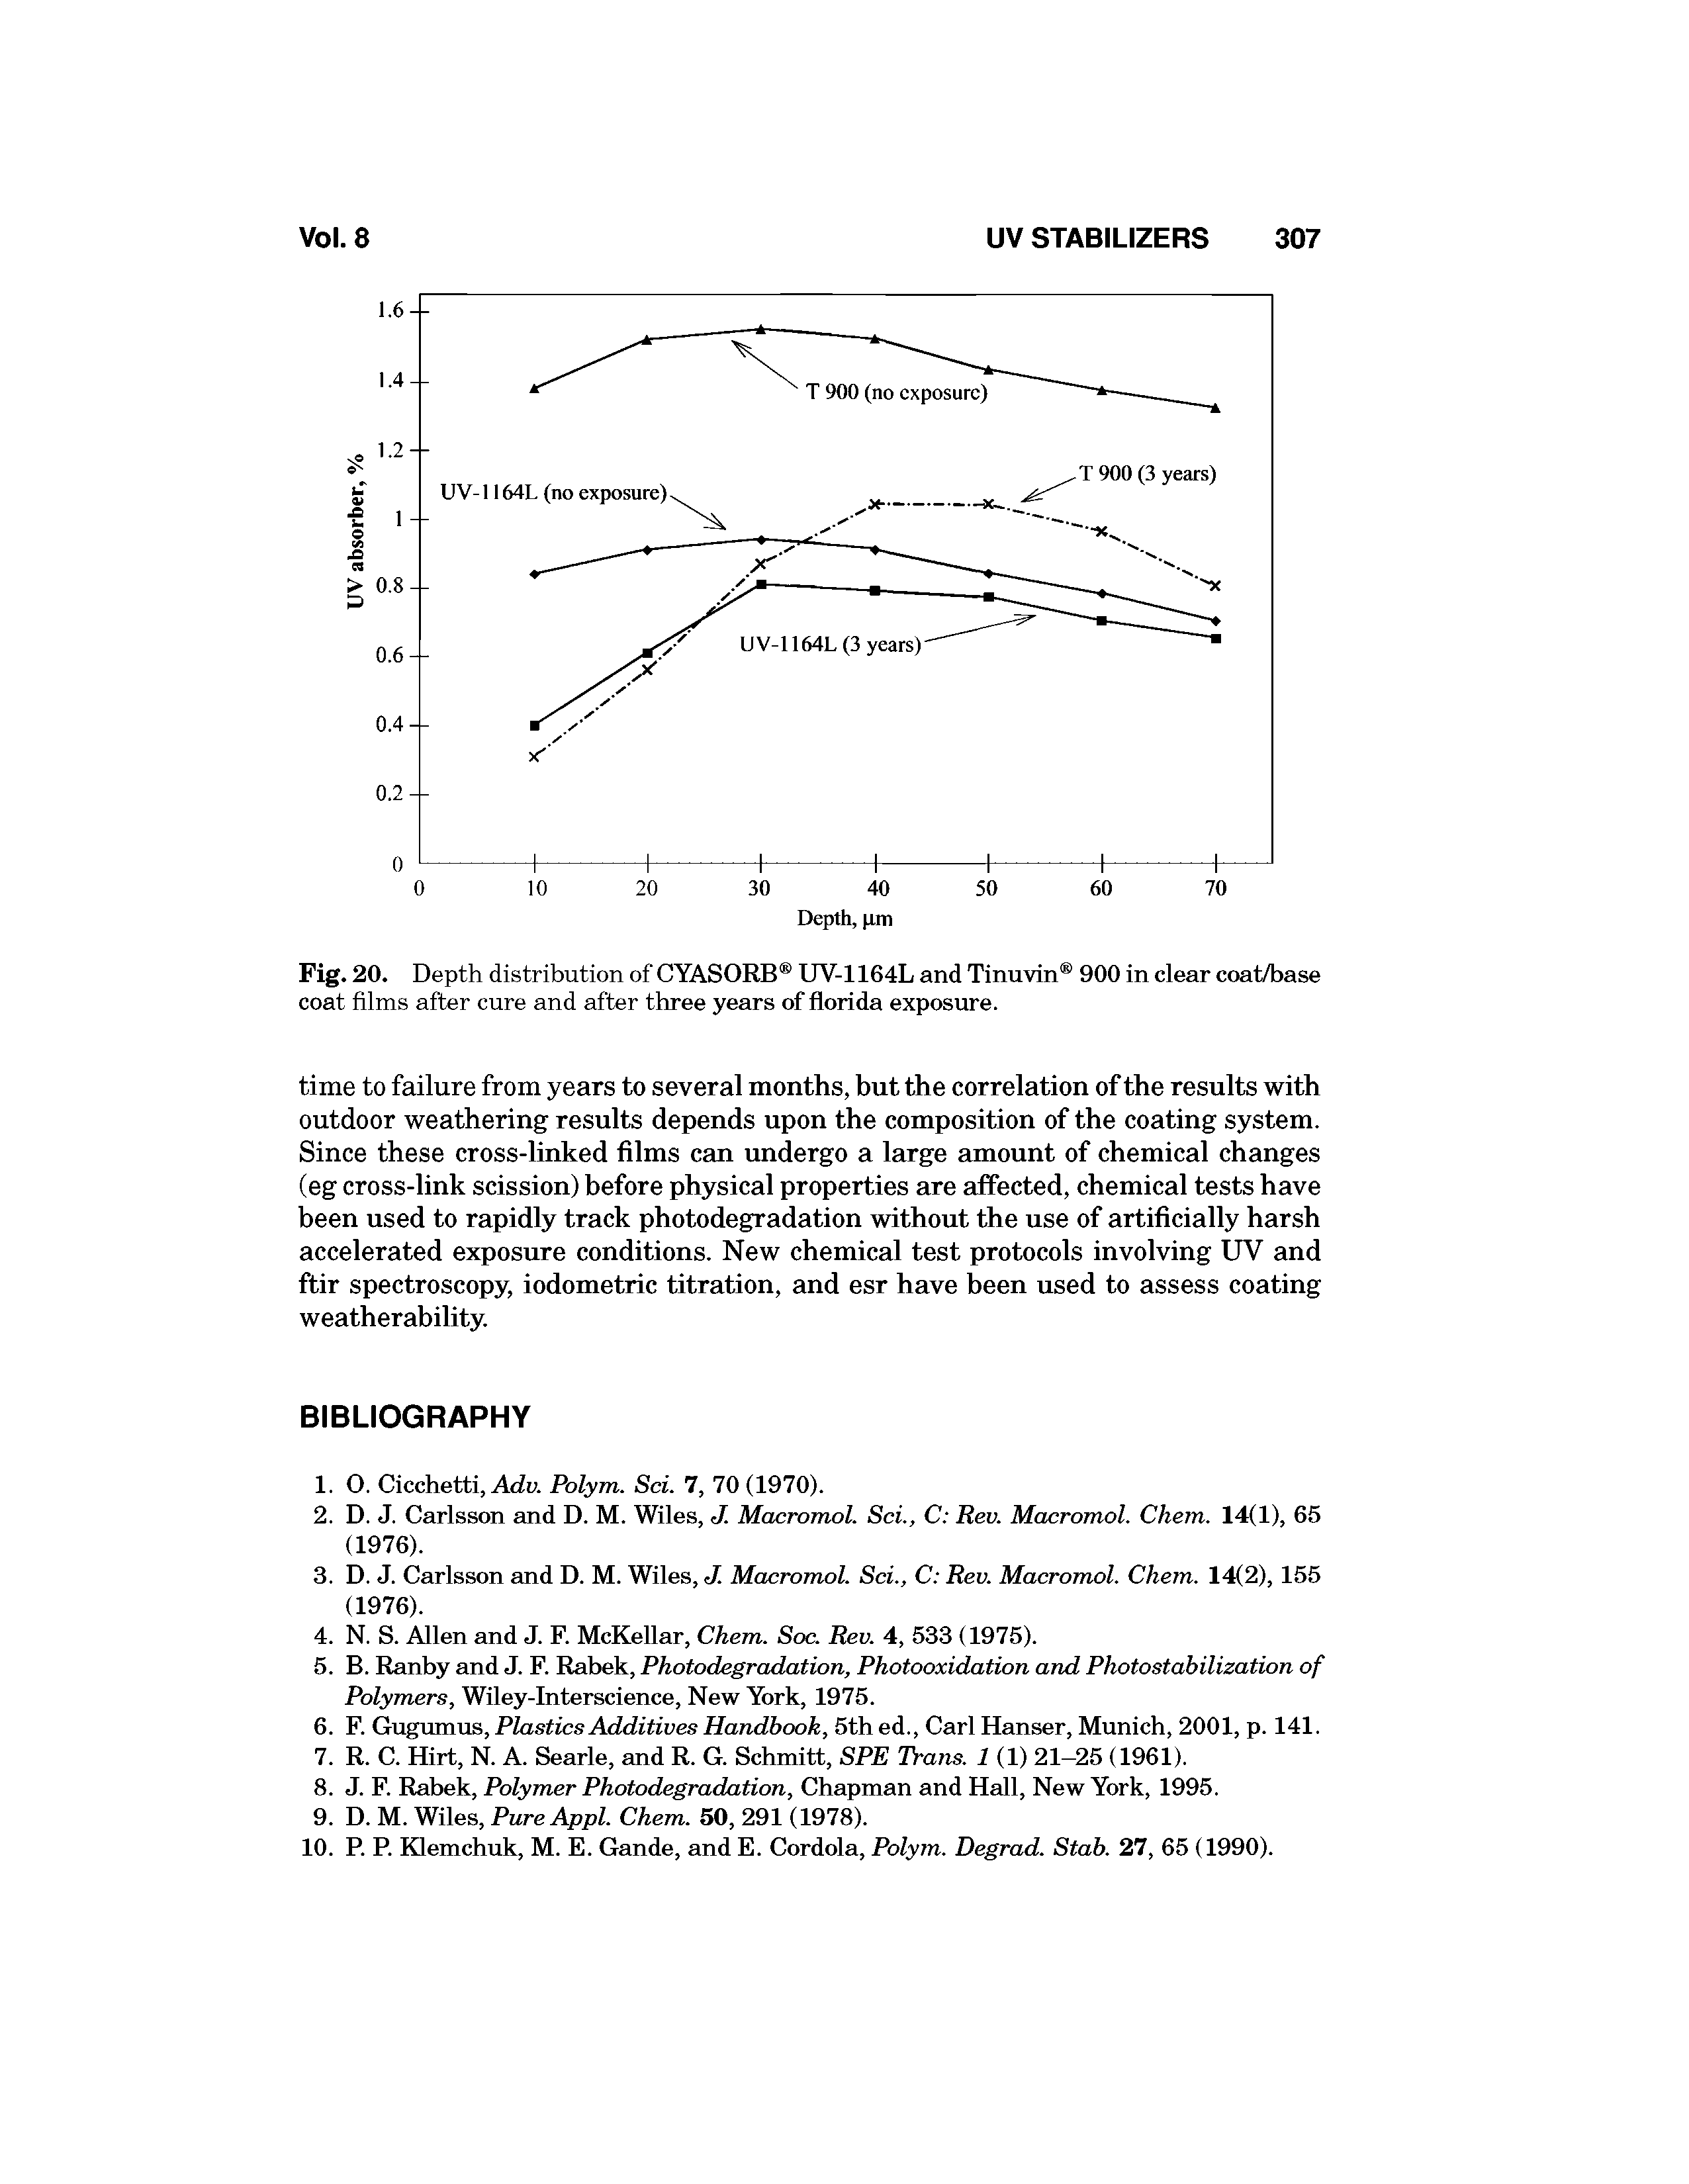 Fig. 20. Depth distribution of CYASORB UV-1164L and Tinuvin 900 in clear coat/base coat films after cure and after three years of florida exposure.